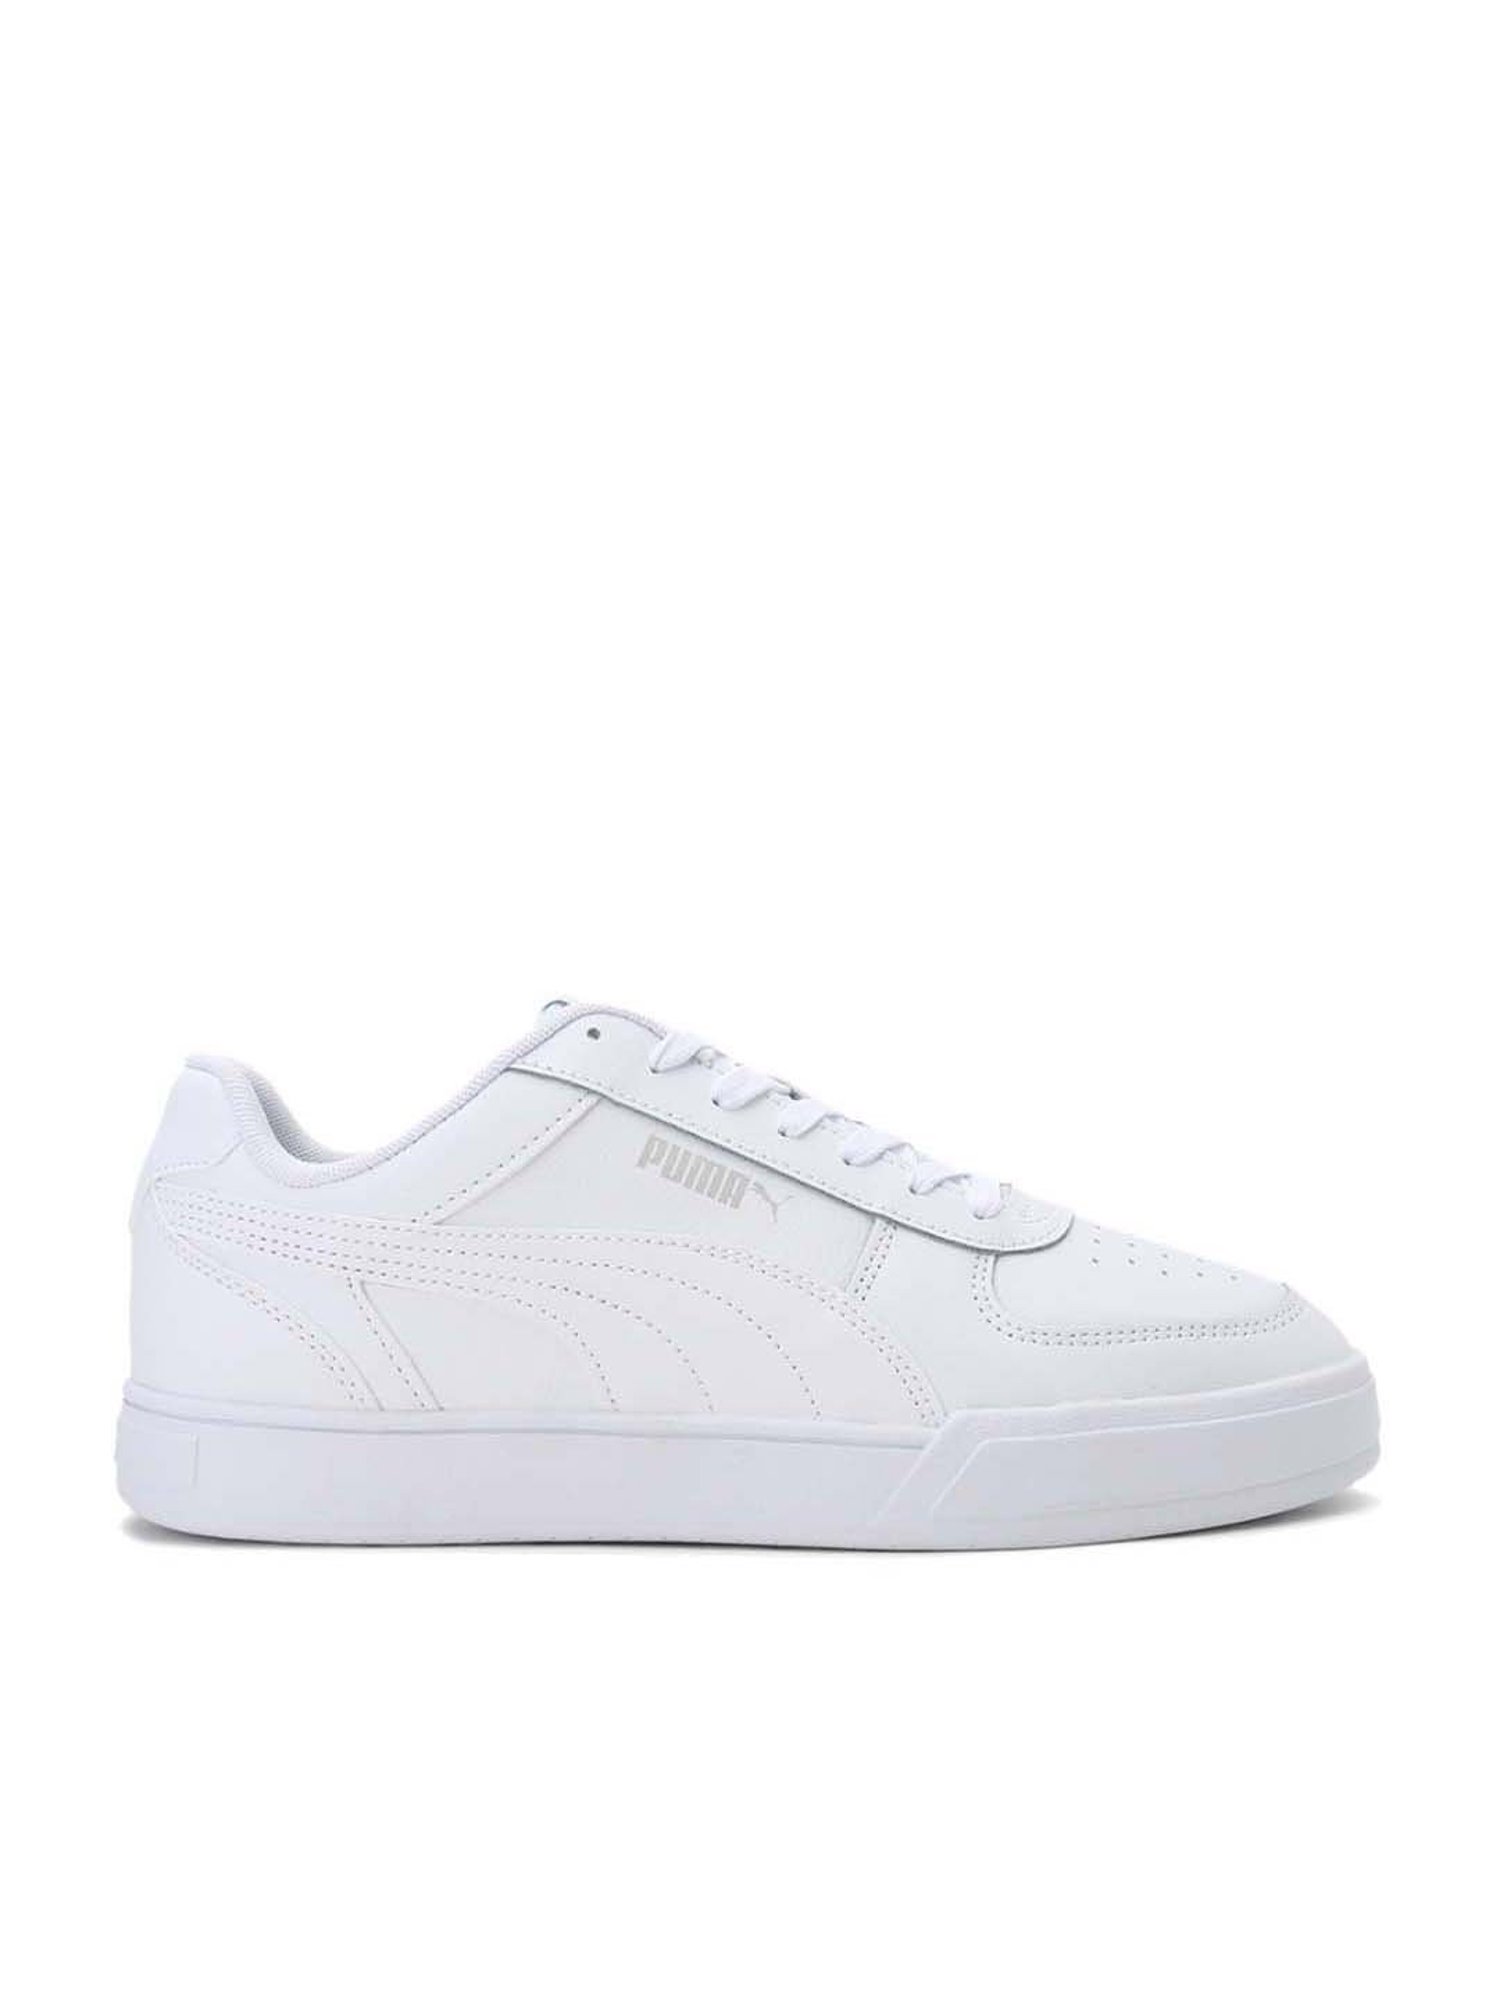 Puma White/Green Caven Lace-up Trainer